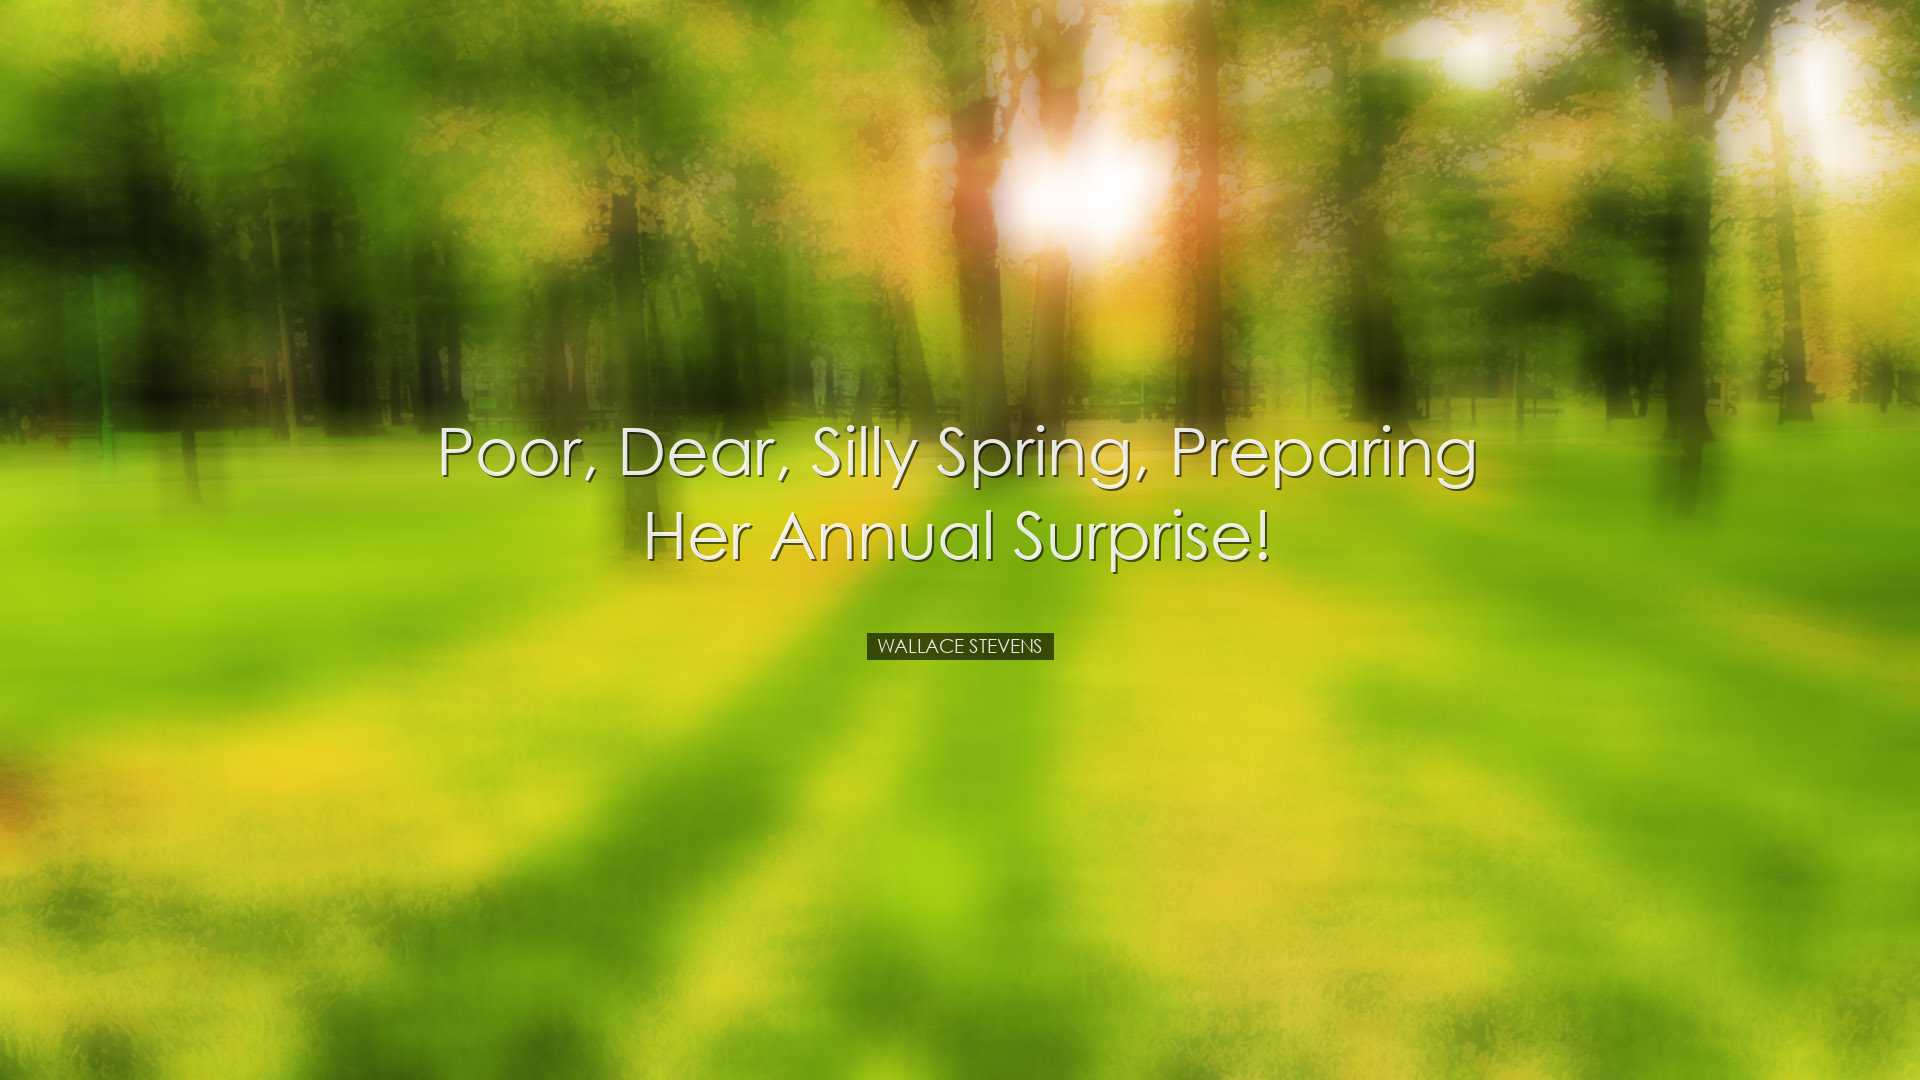 Poor, dear, silly Spring, preparing her annual surprise! - Wallace